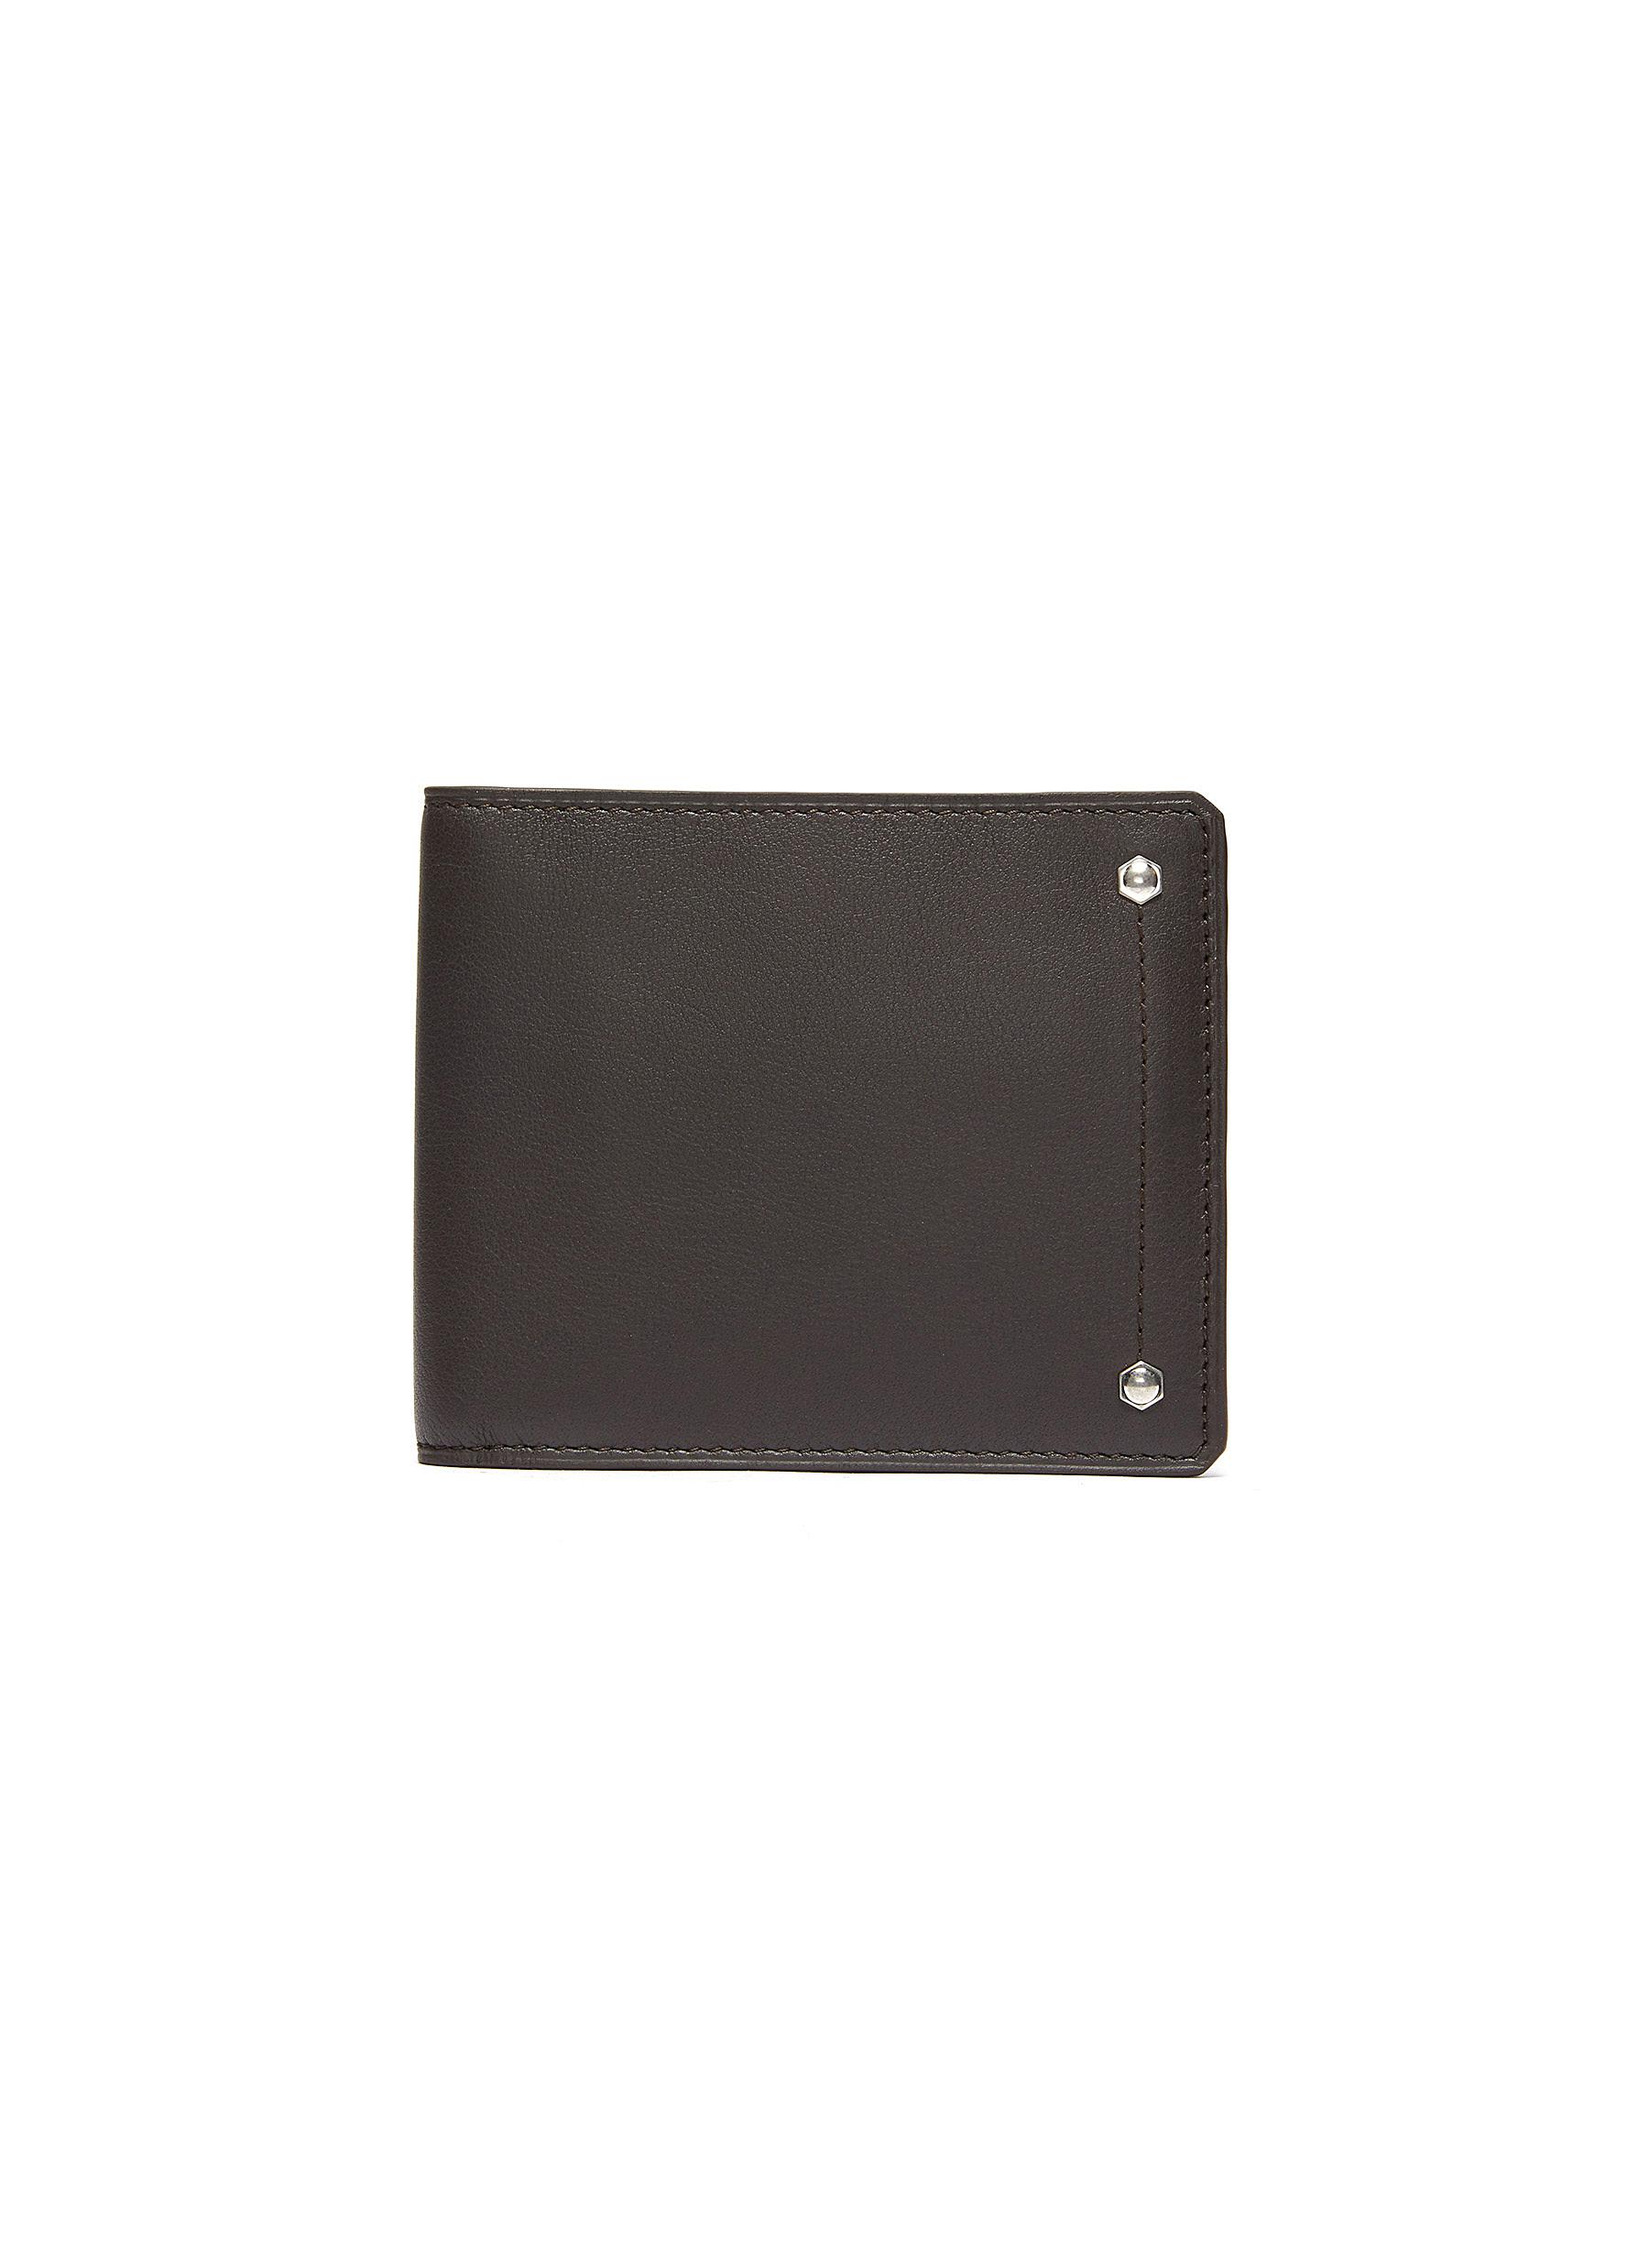 'Hex' leather bifold wallet